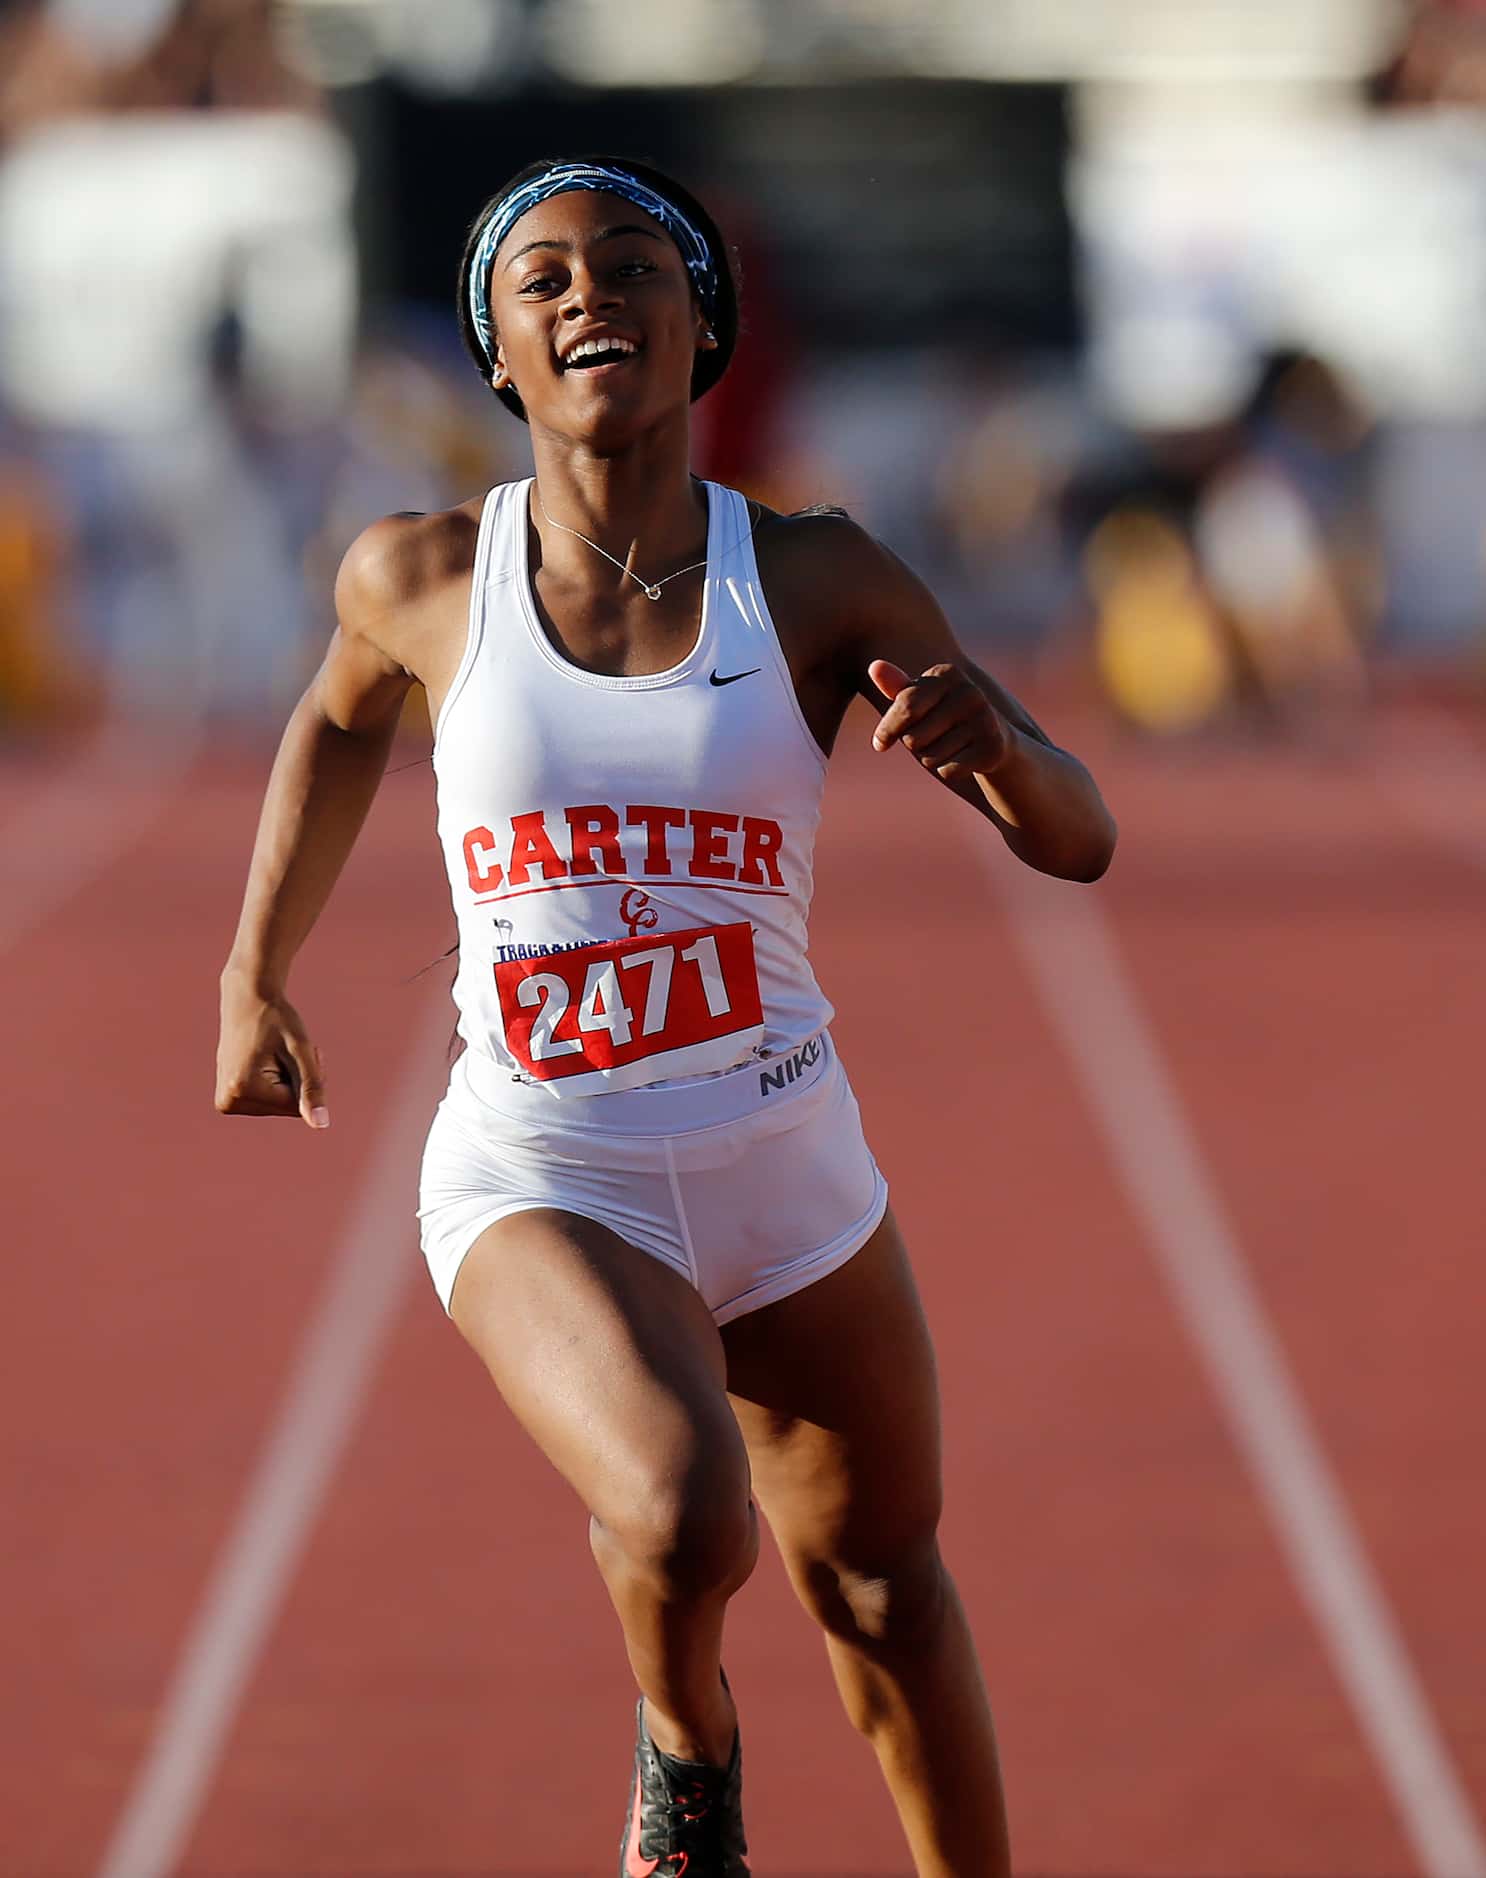 Dallas Carter's Sha'Carri Richardson (2471) finishes first in the class 4A girls 100-meter...